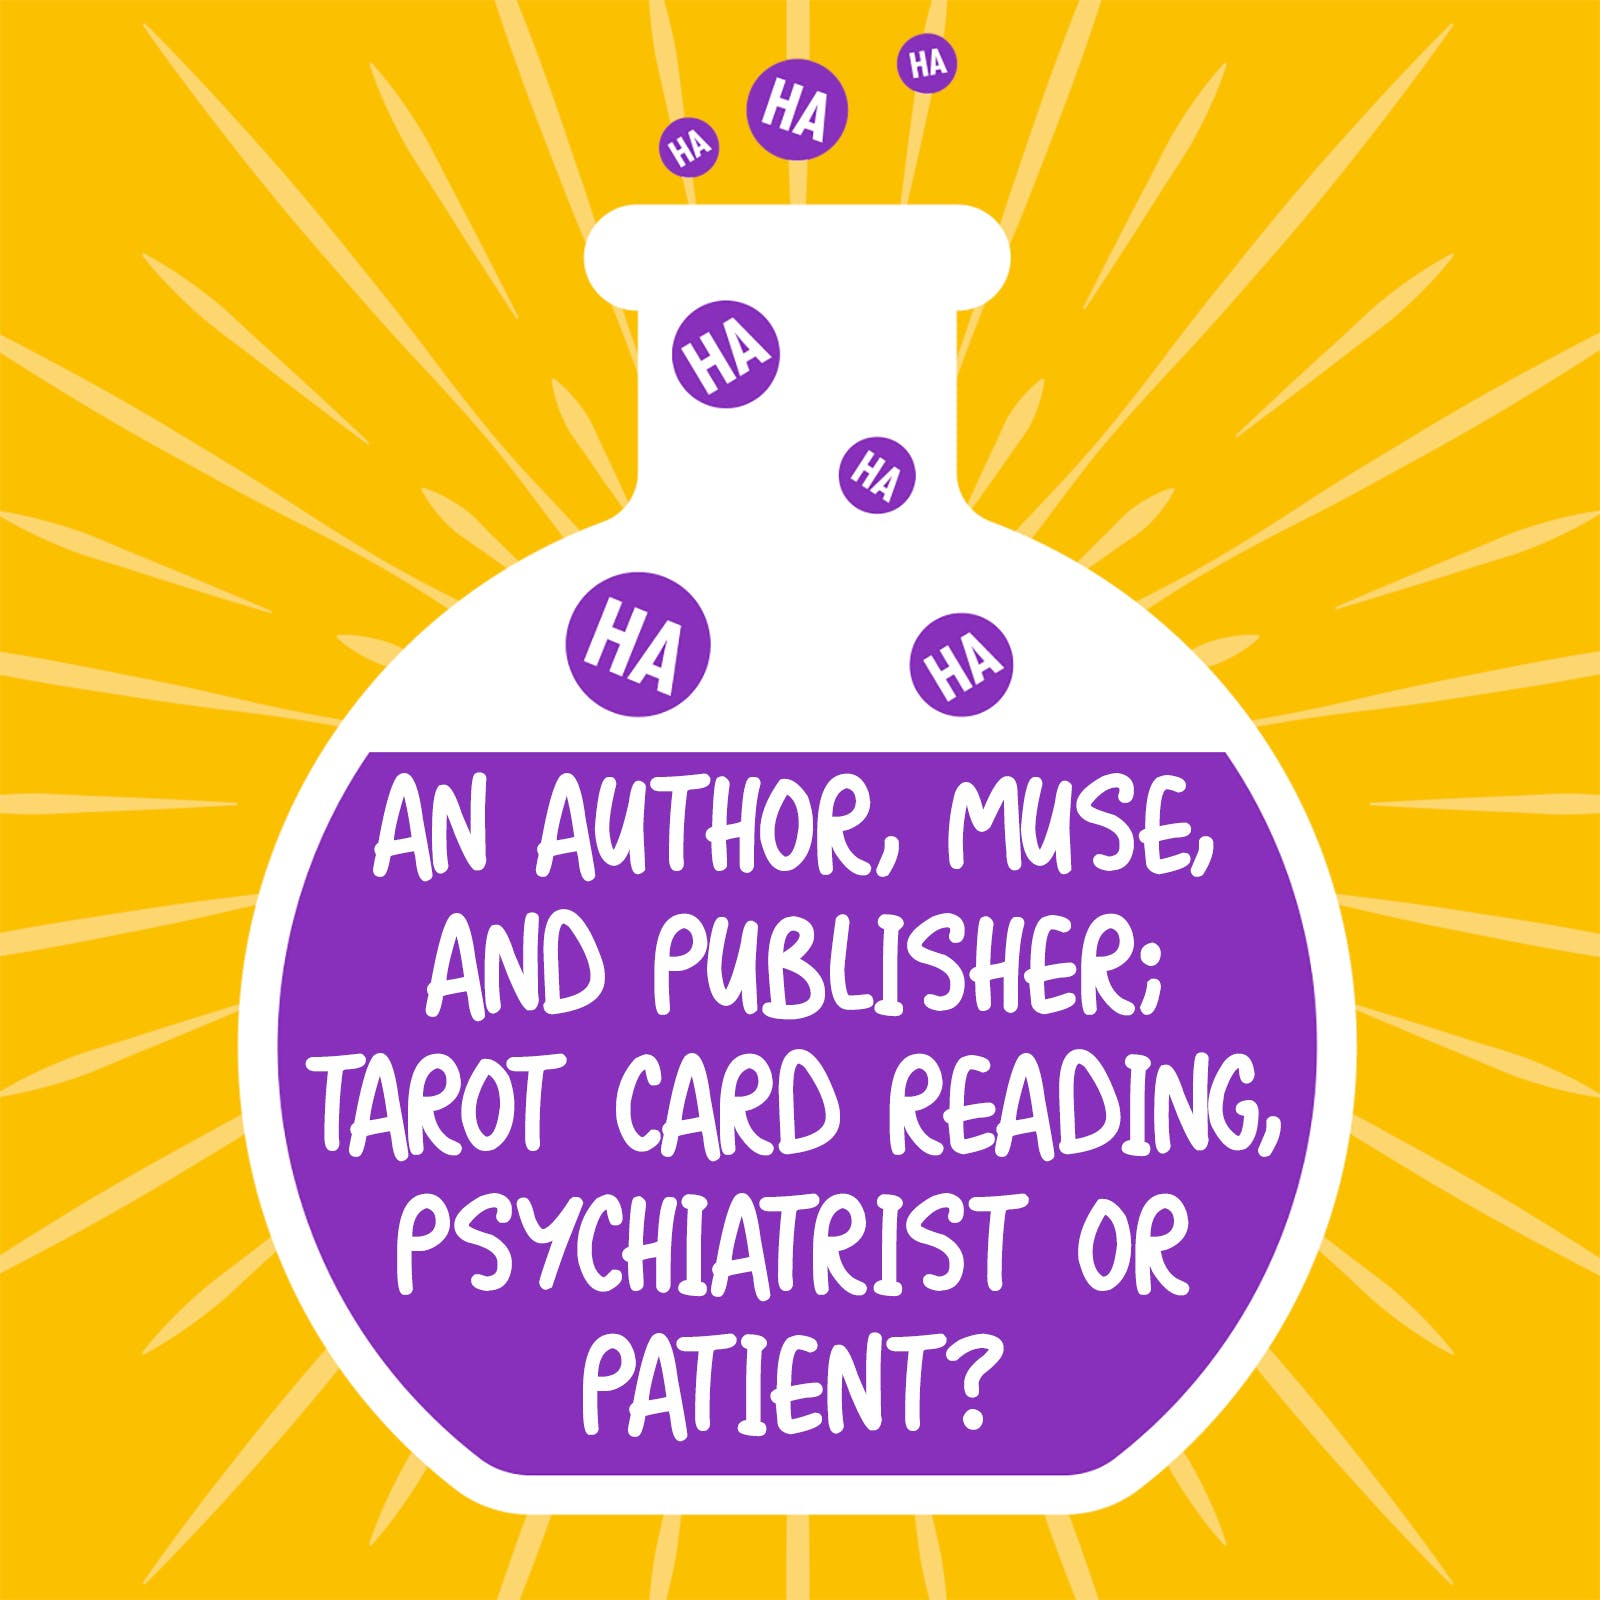 An Author, Muse, and Publisher; Tarot Card Reading, Psychiatrist or Patient?